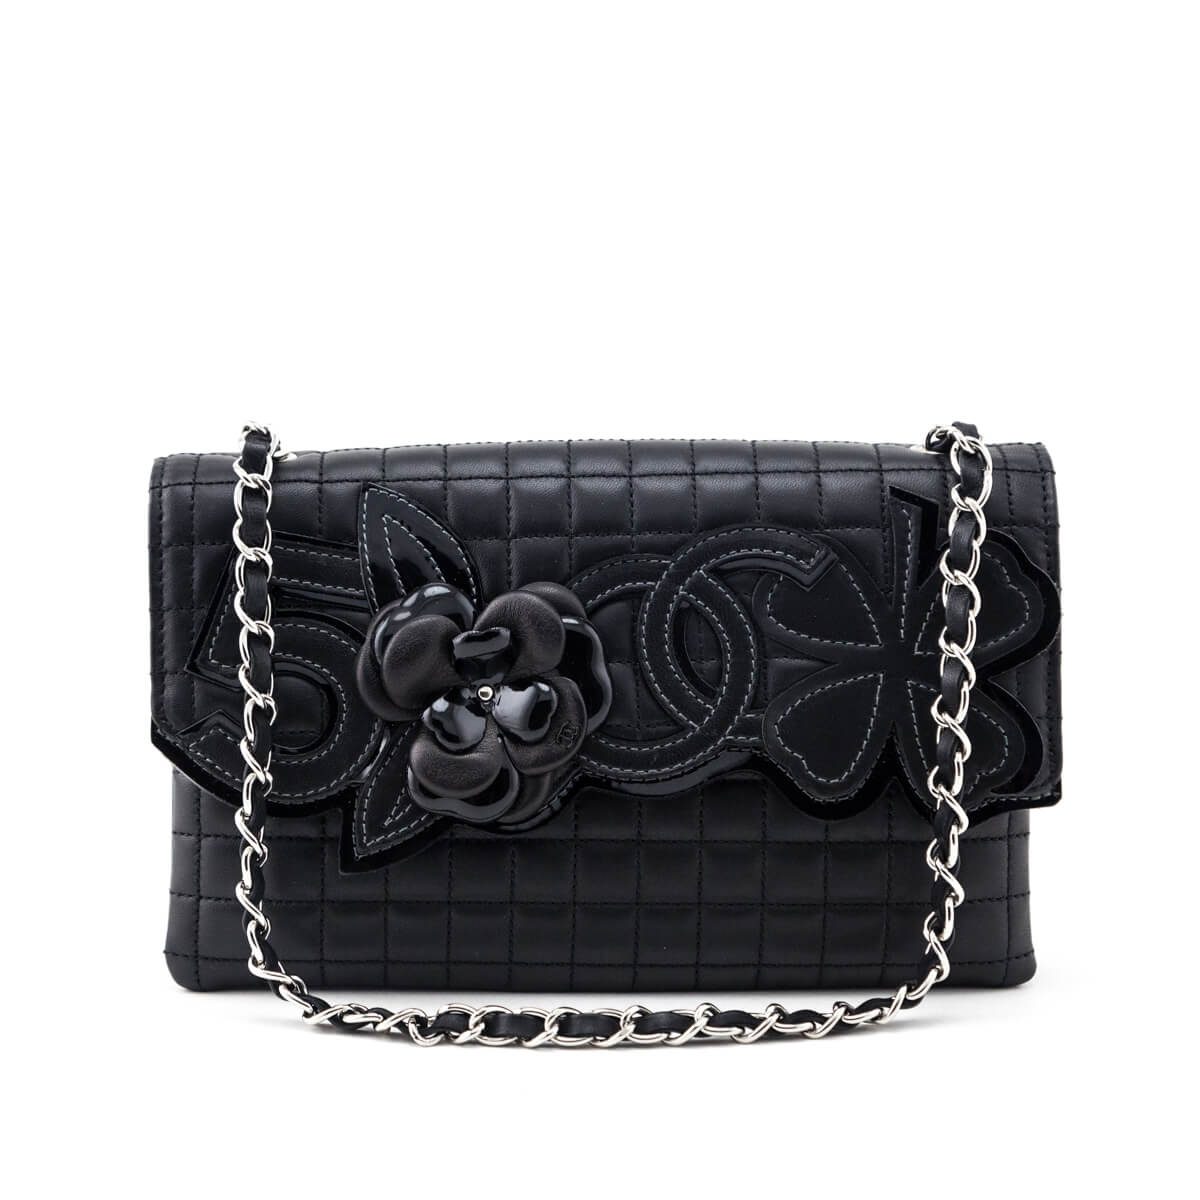 Chanel Black Quilted Lambskin Chocolate Bar Camellia No. 5